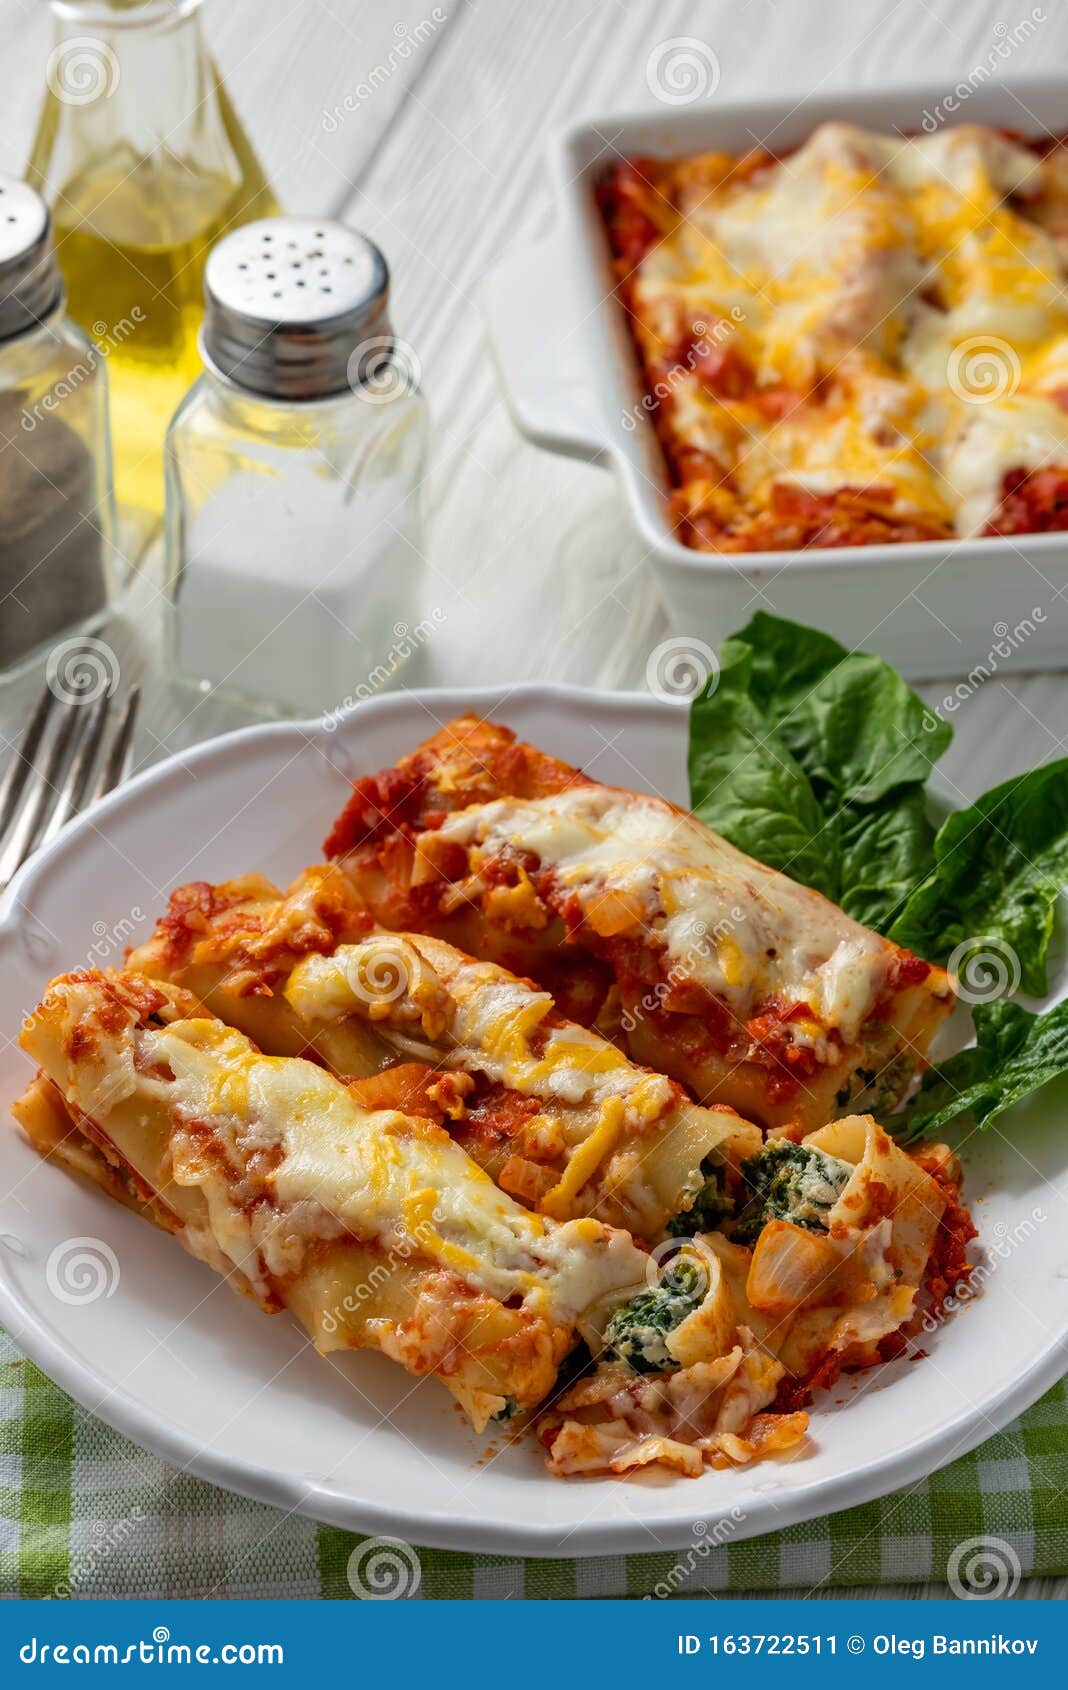 Spinach and Ricotta Stuffed Cannelloni Baked in Tomato Sauce. Stock ...